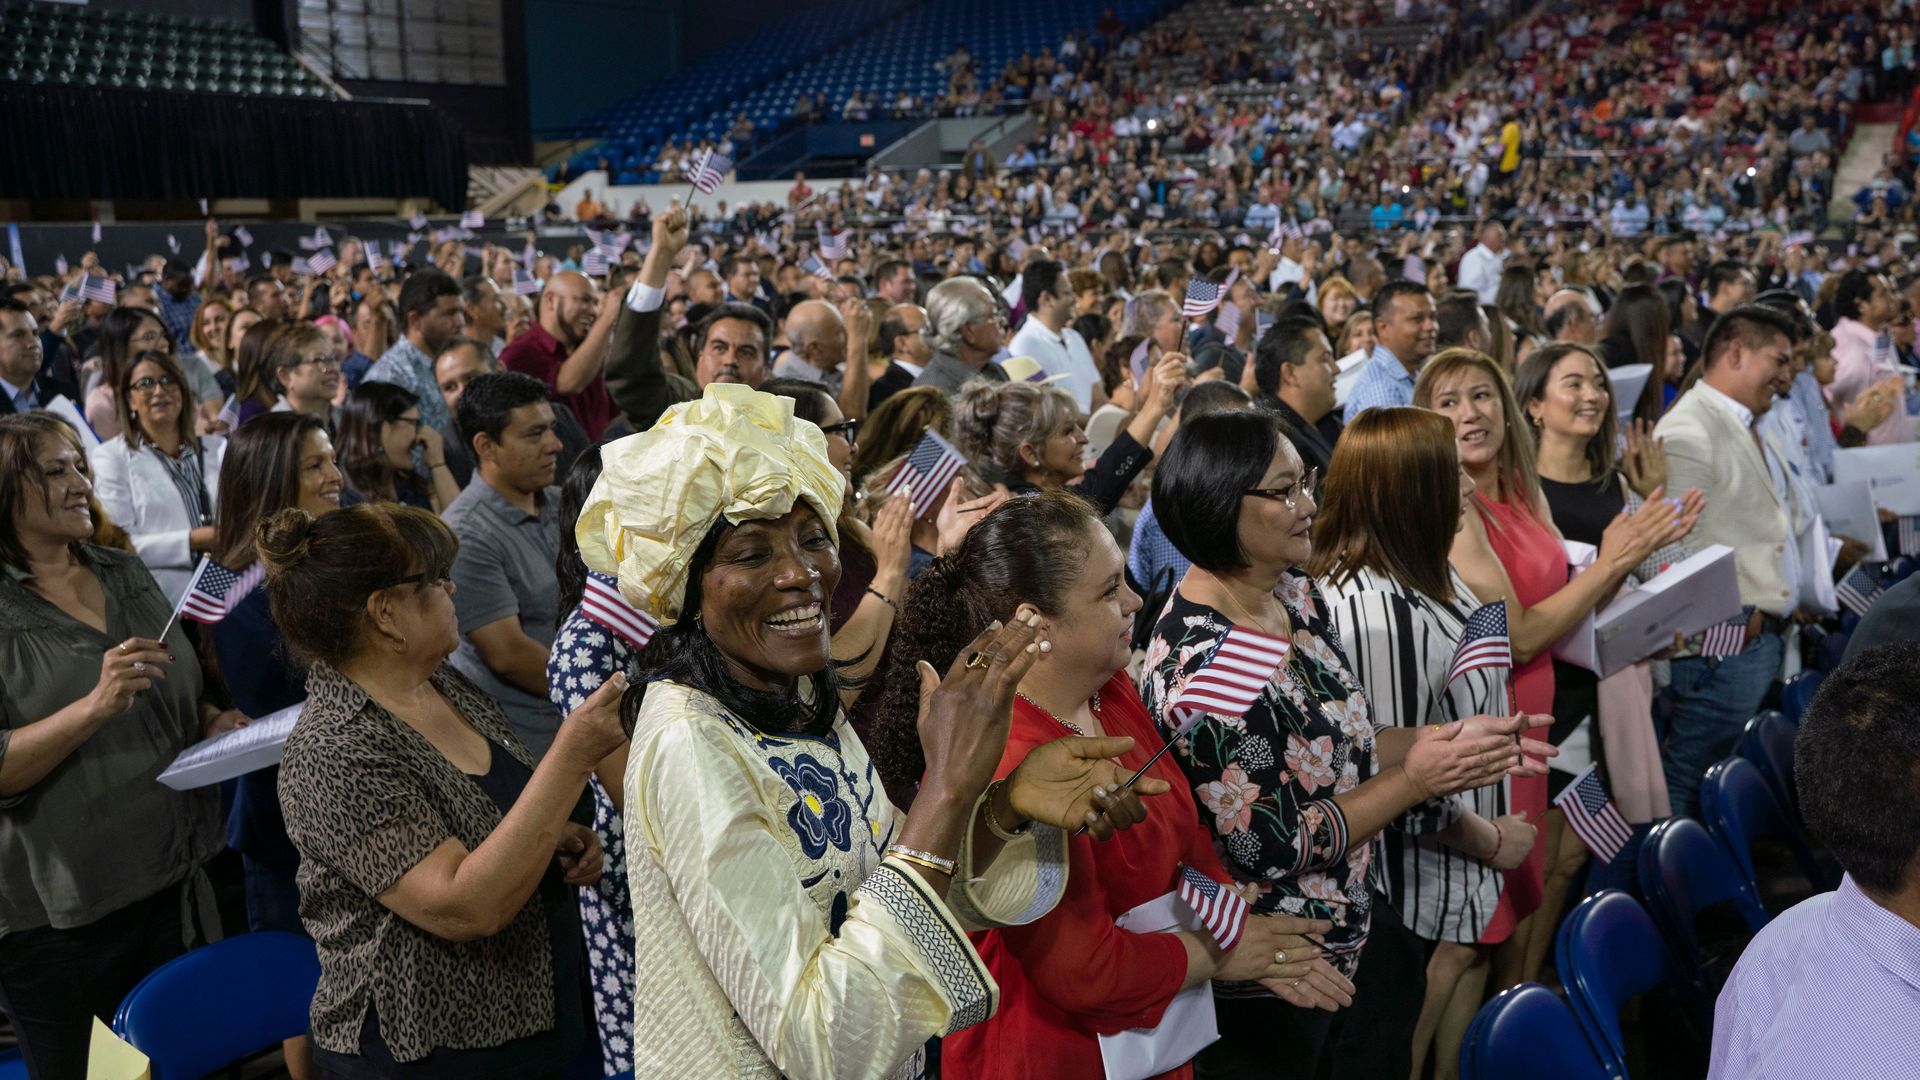 A diverse crowd of new Americans at a naturalization ceremony in El Paso, Texas.